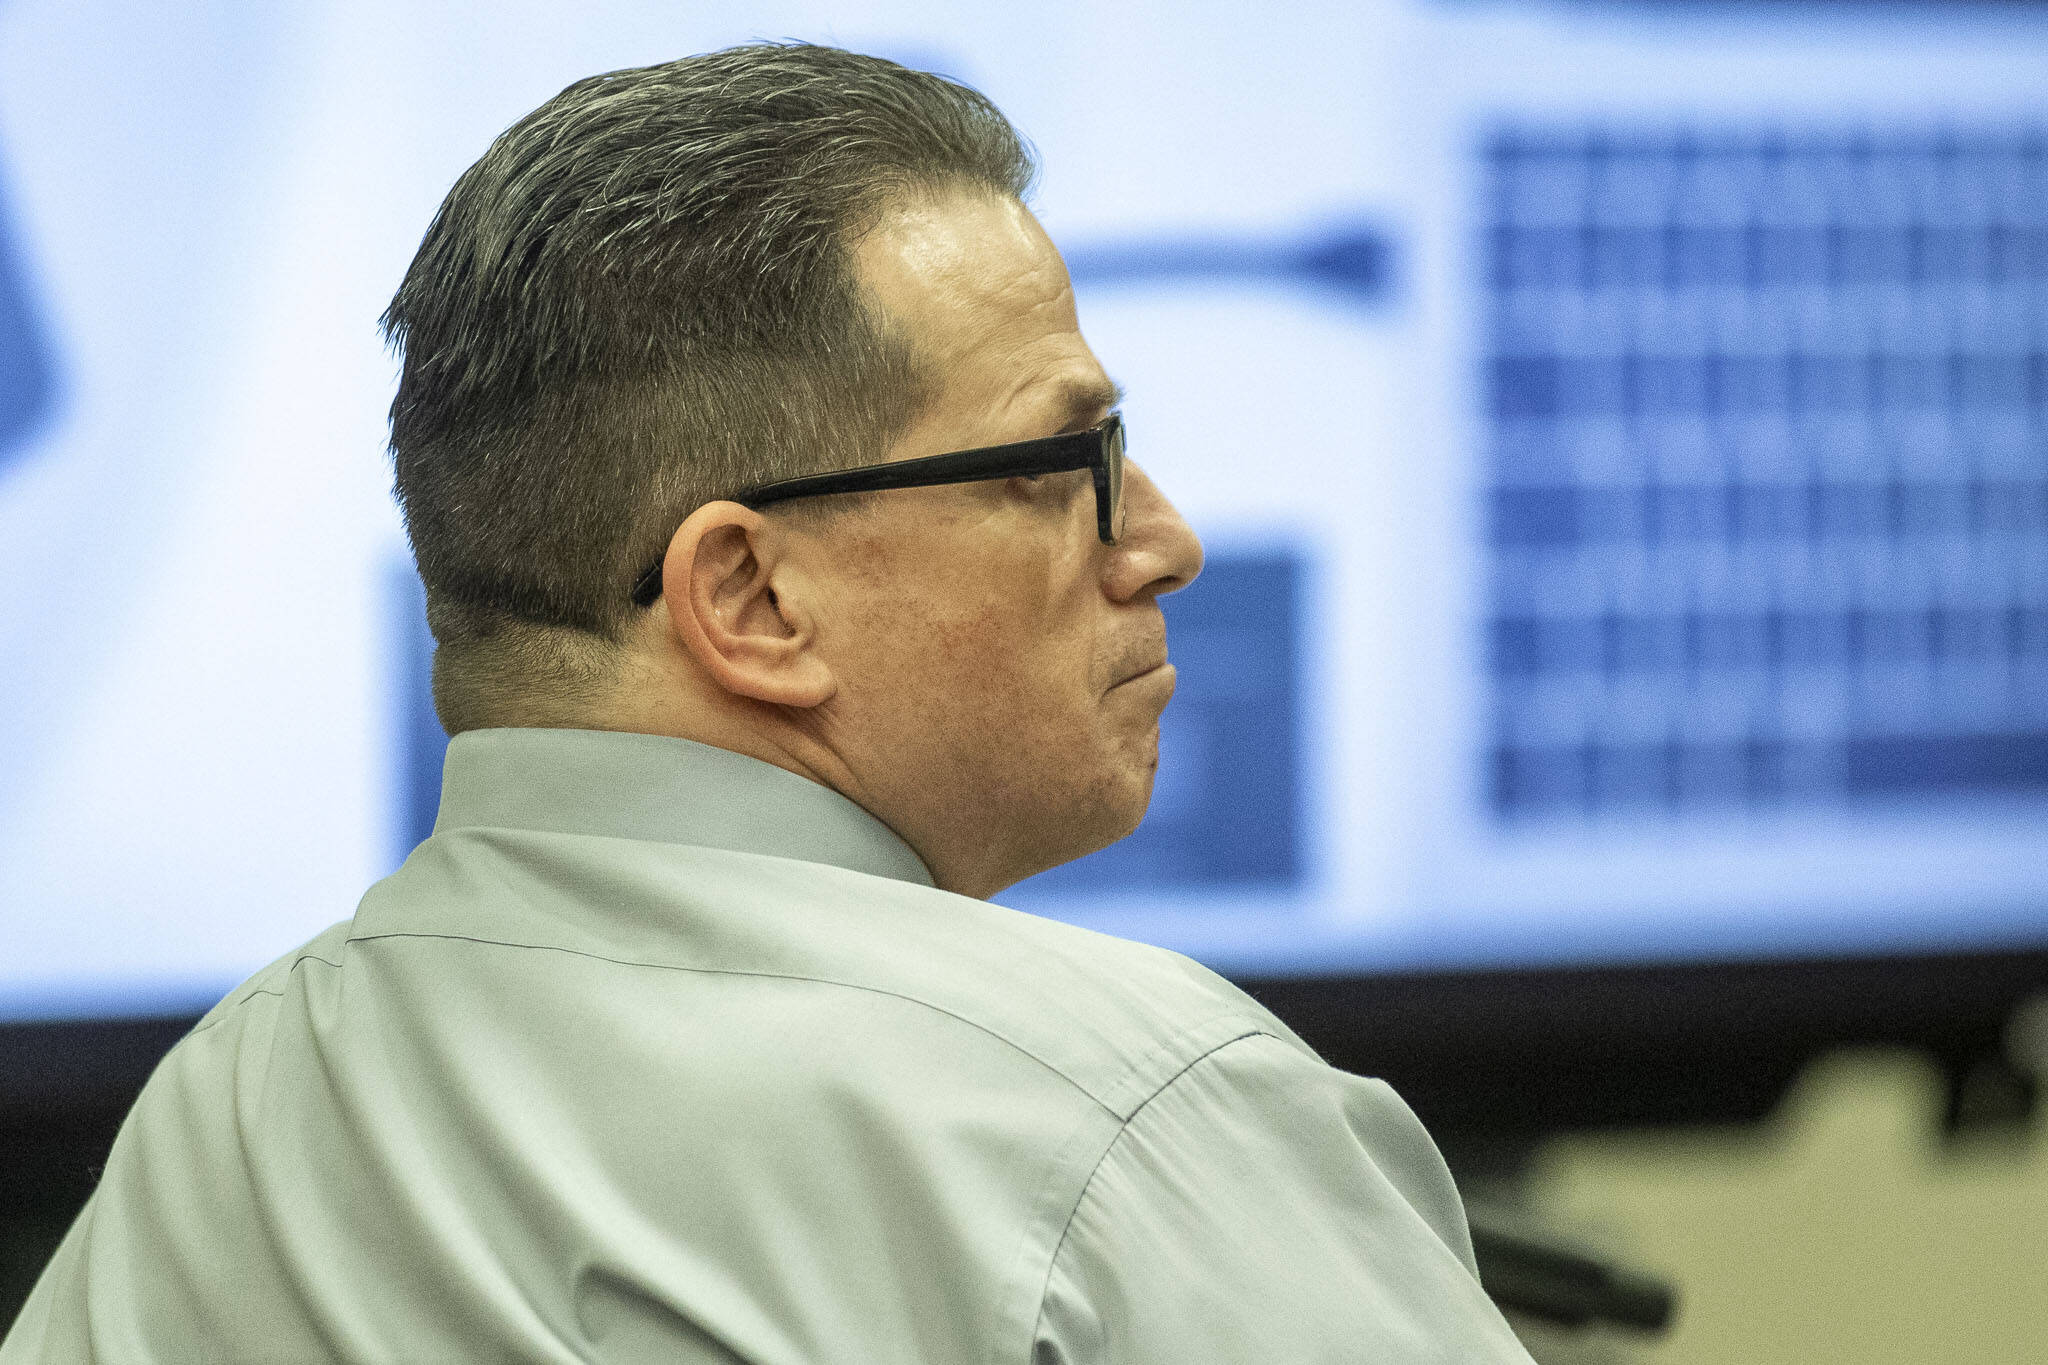 Richard Rotter listens to witness testimony in his trial at the Snohomish County Courthouse in Everett, Washington on Monday, March 20, 2023. (Annie Barker / The Herald)